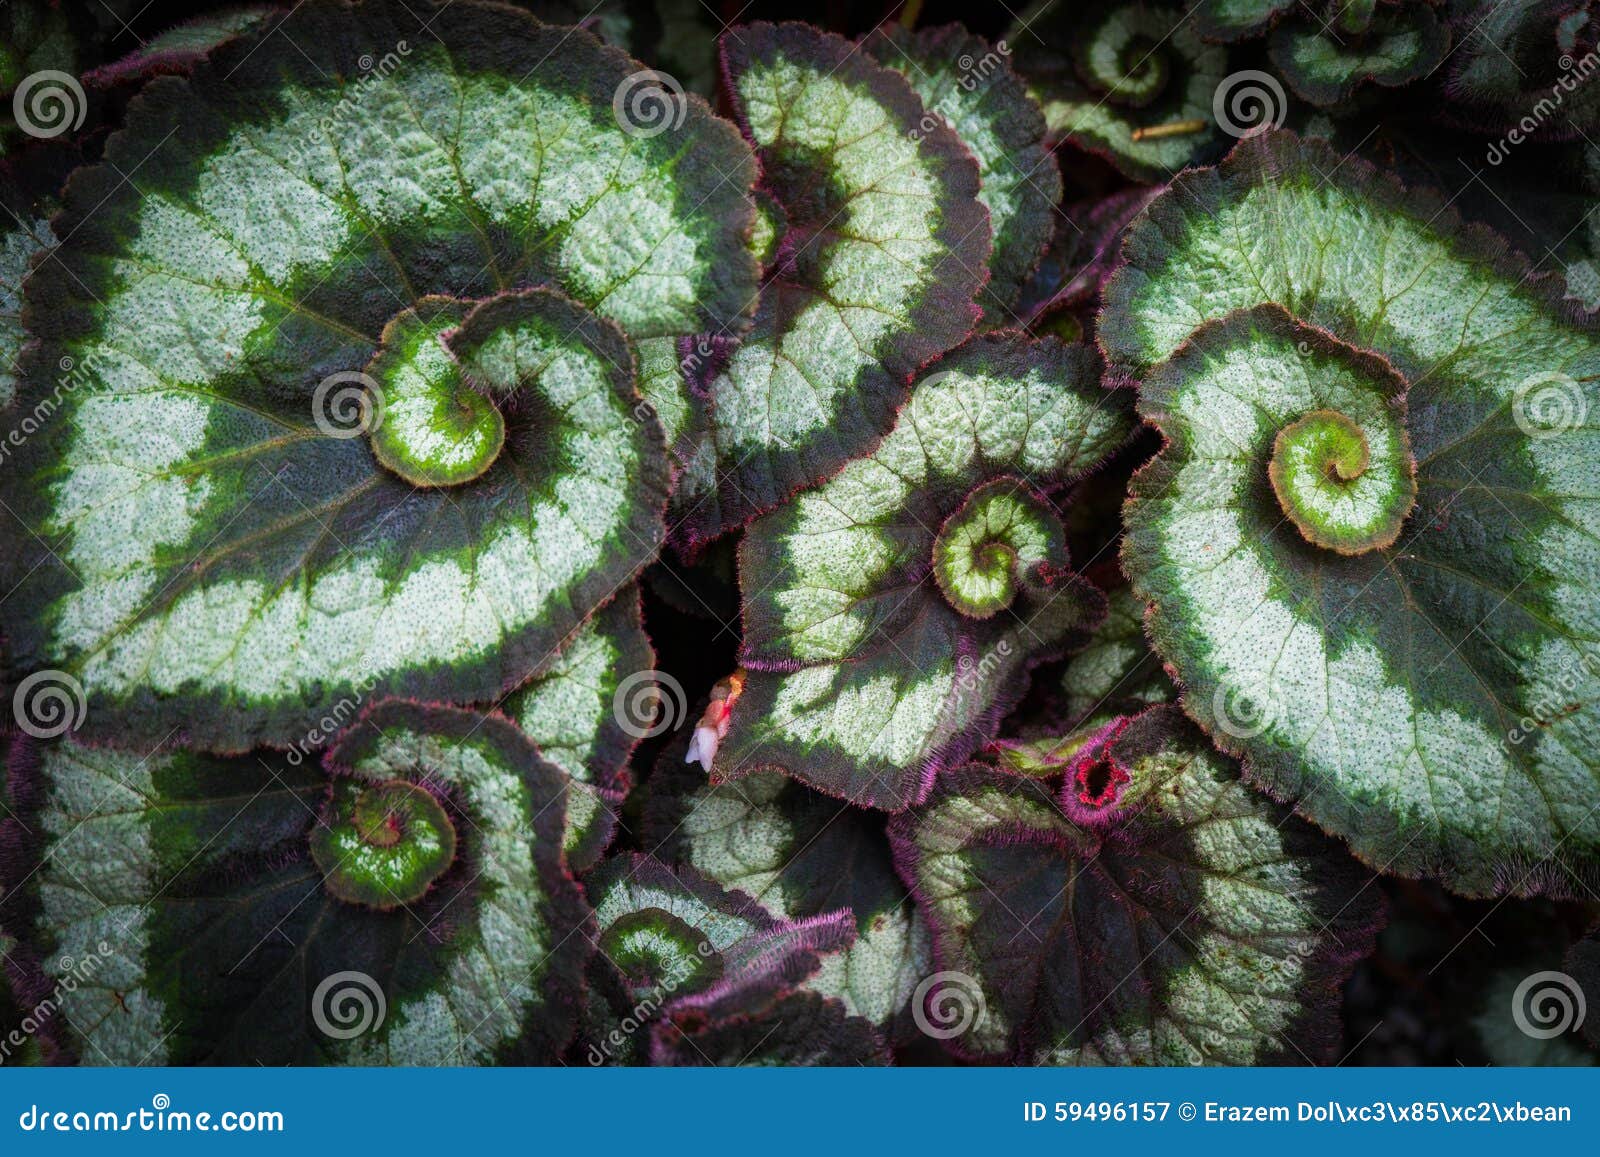 Spiral Leaves of the Begonia Plant Stock Image - Image of spiral, colors:  59496157